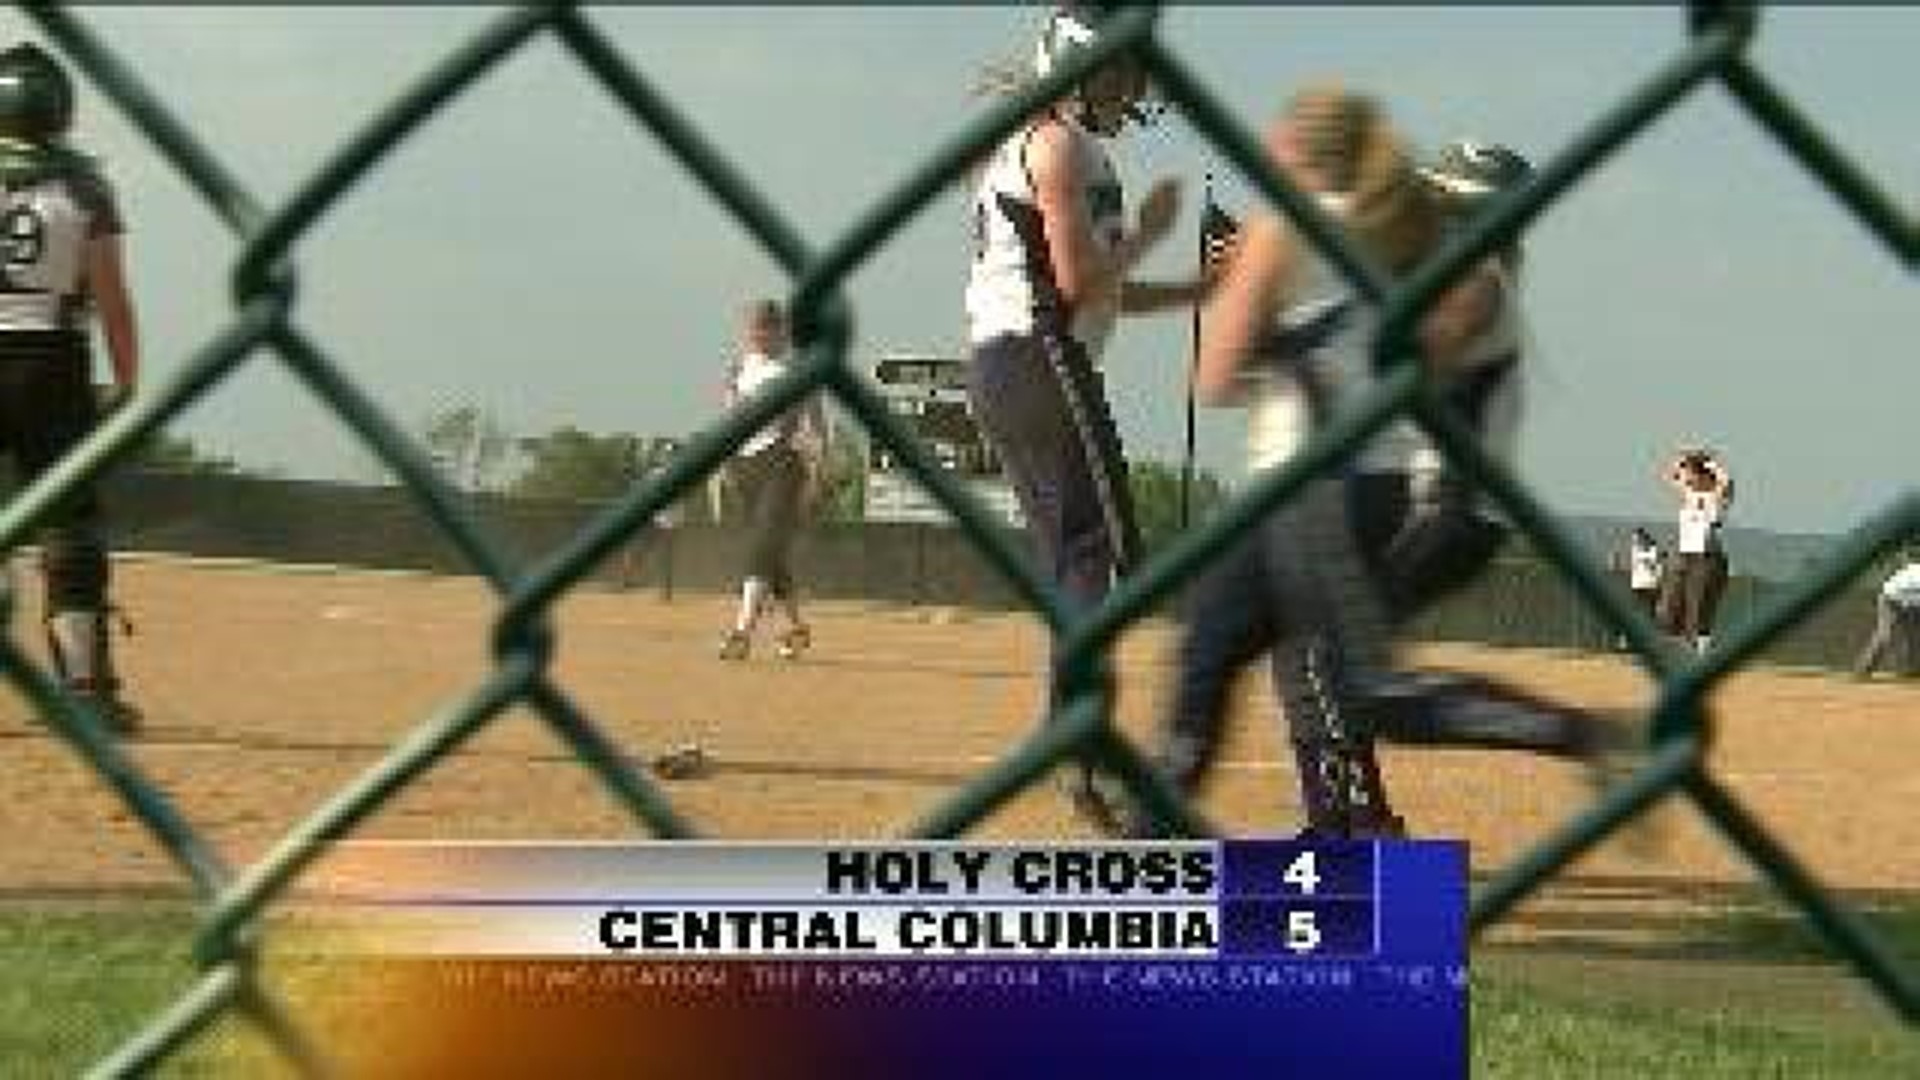 Central Columbia edges Holy Cross